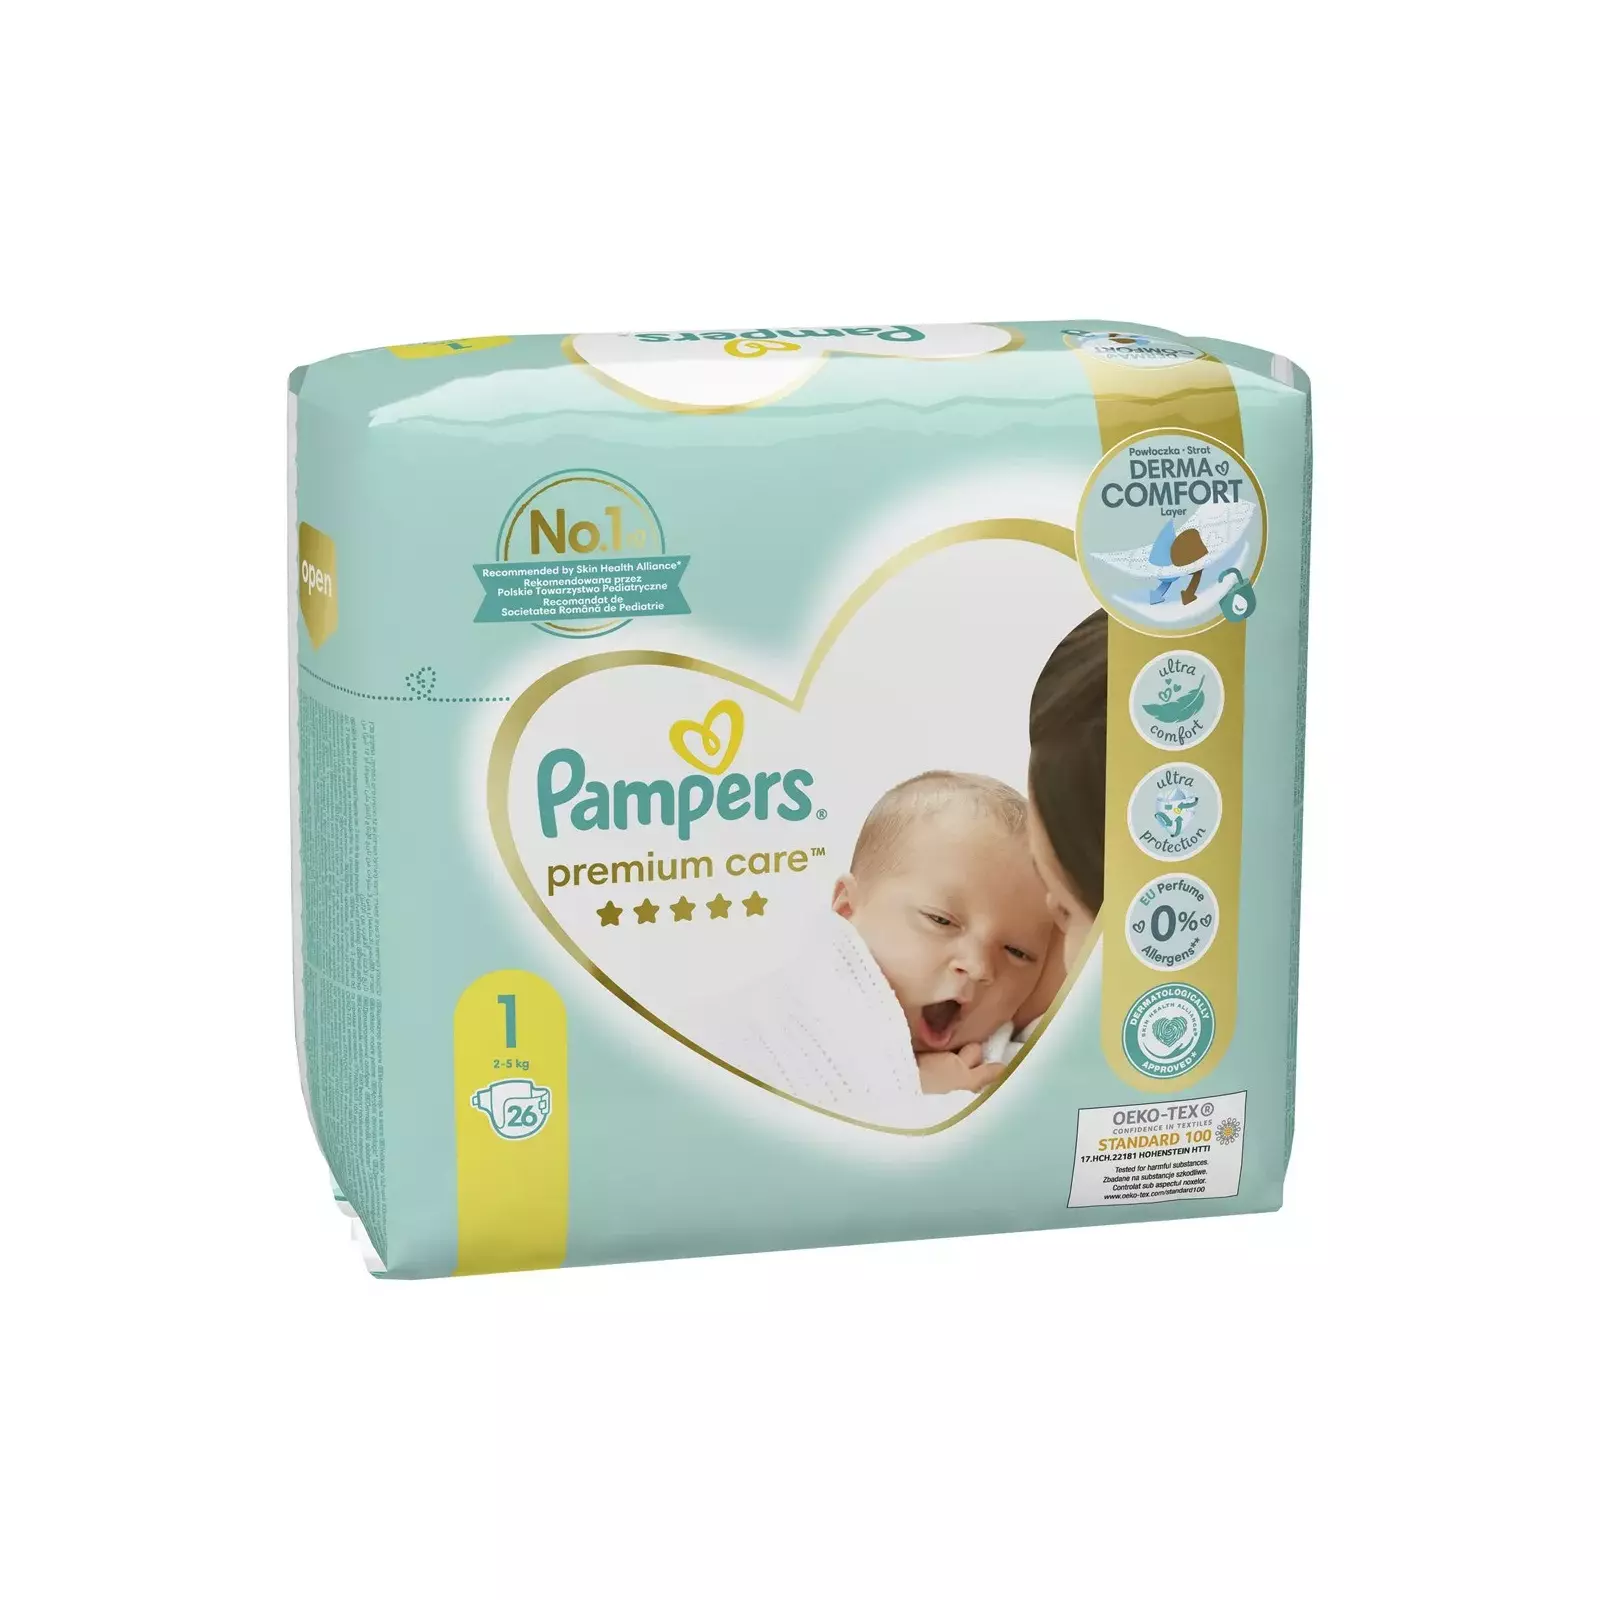 Pampers 8001841104614 Photo 5